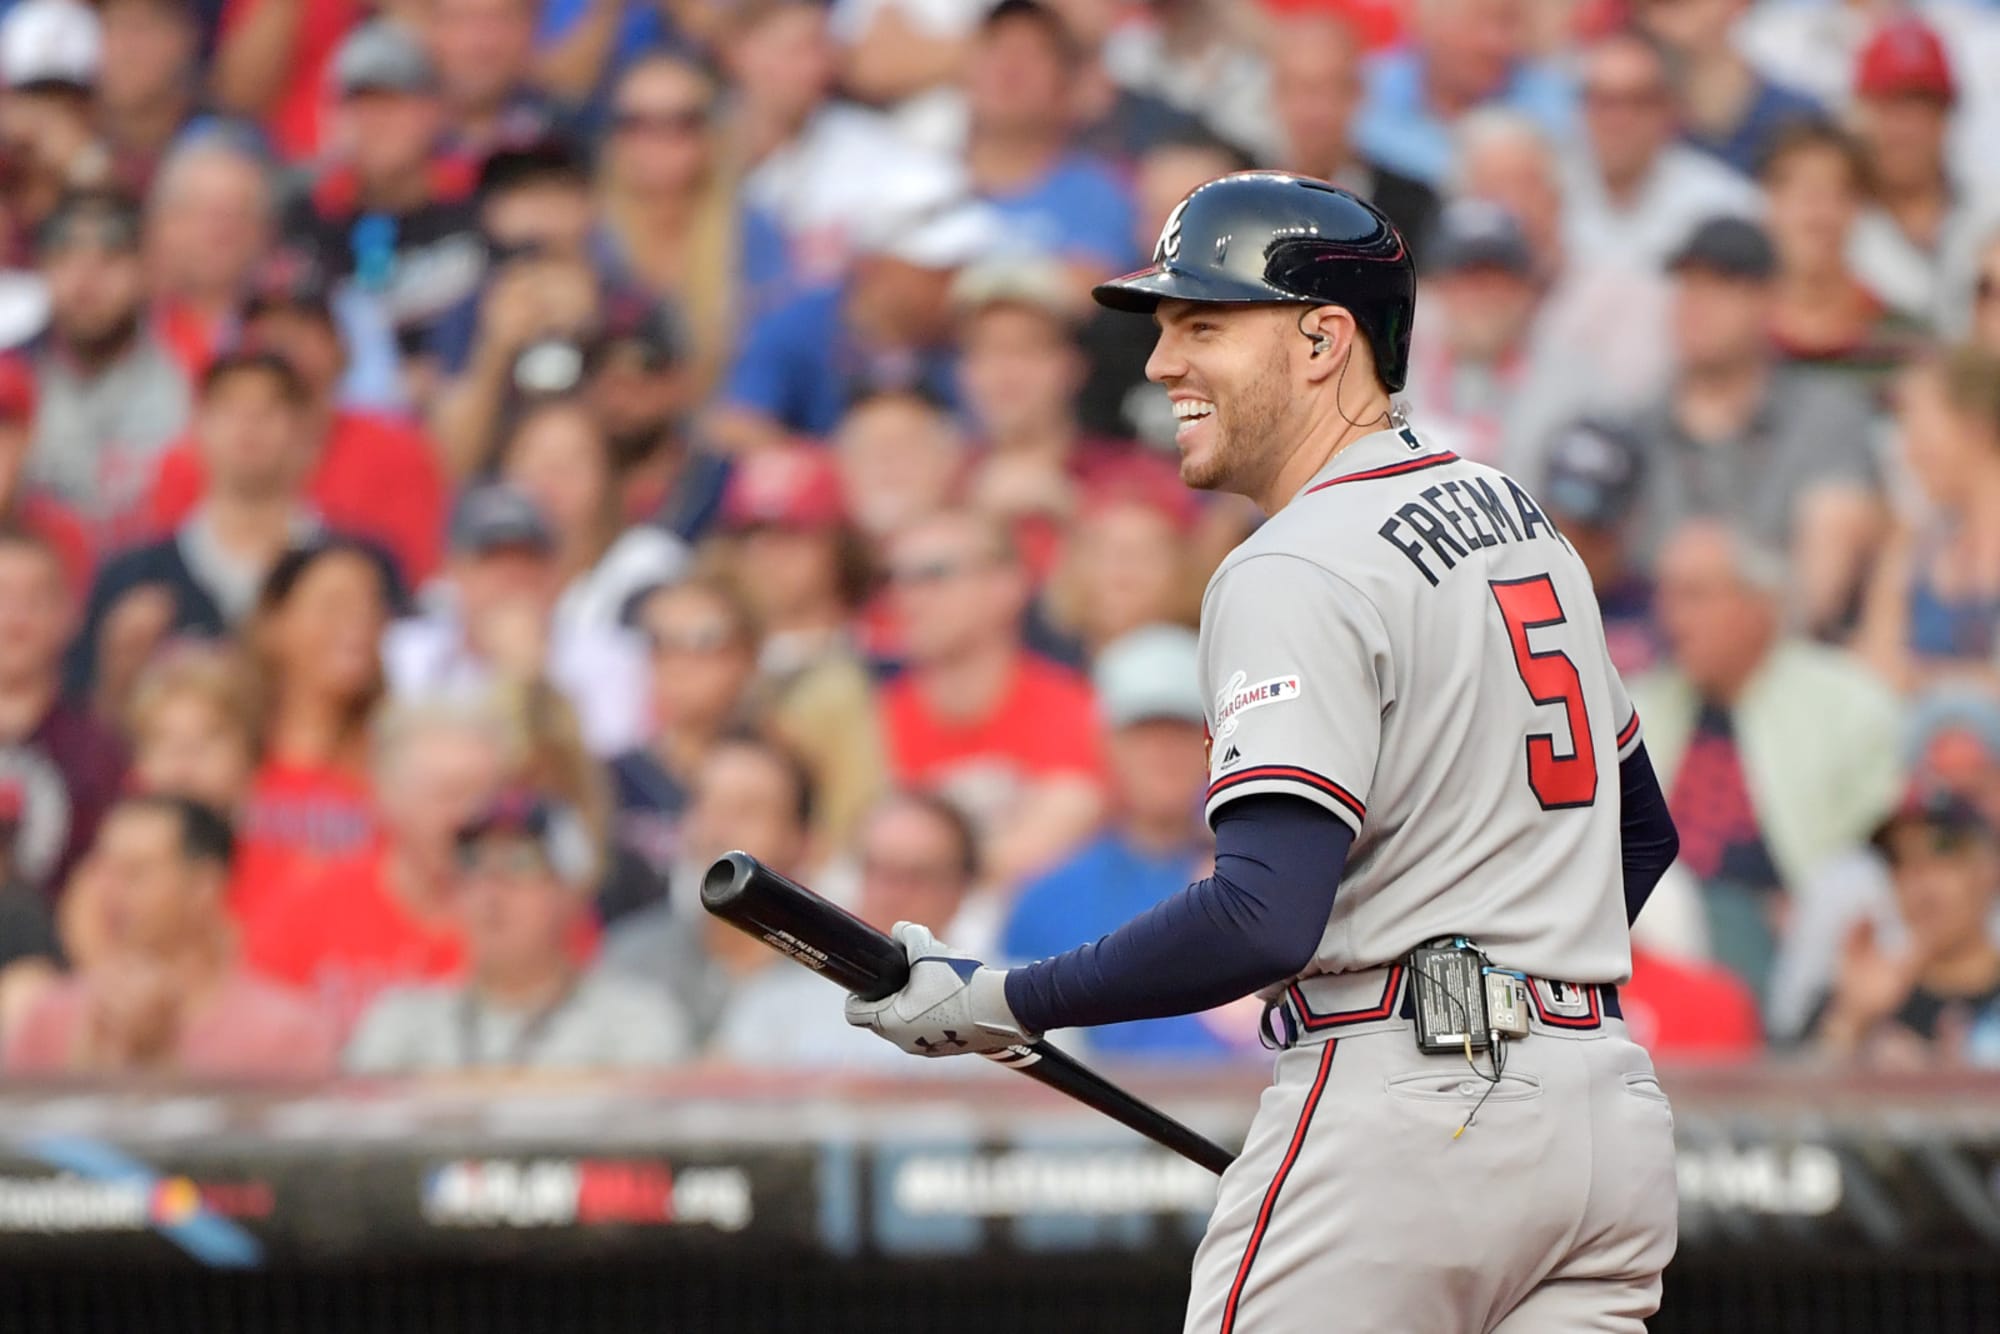 Atlanta Braves Have Crucial FourGame Series Next With Washington Nationals